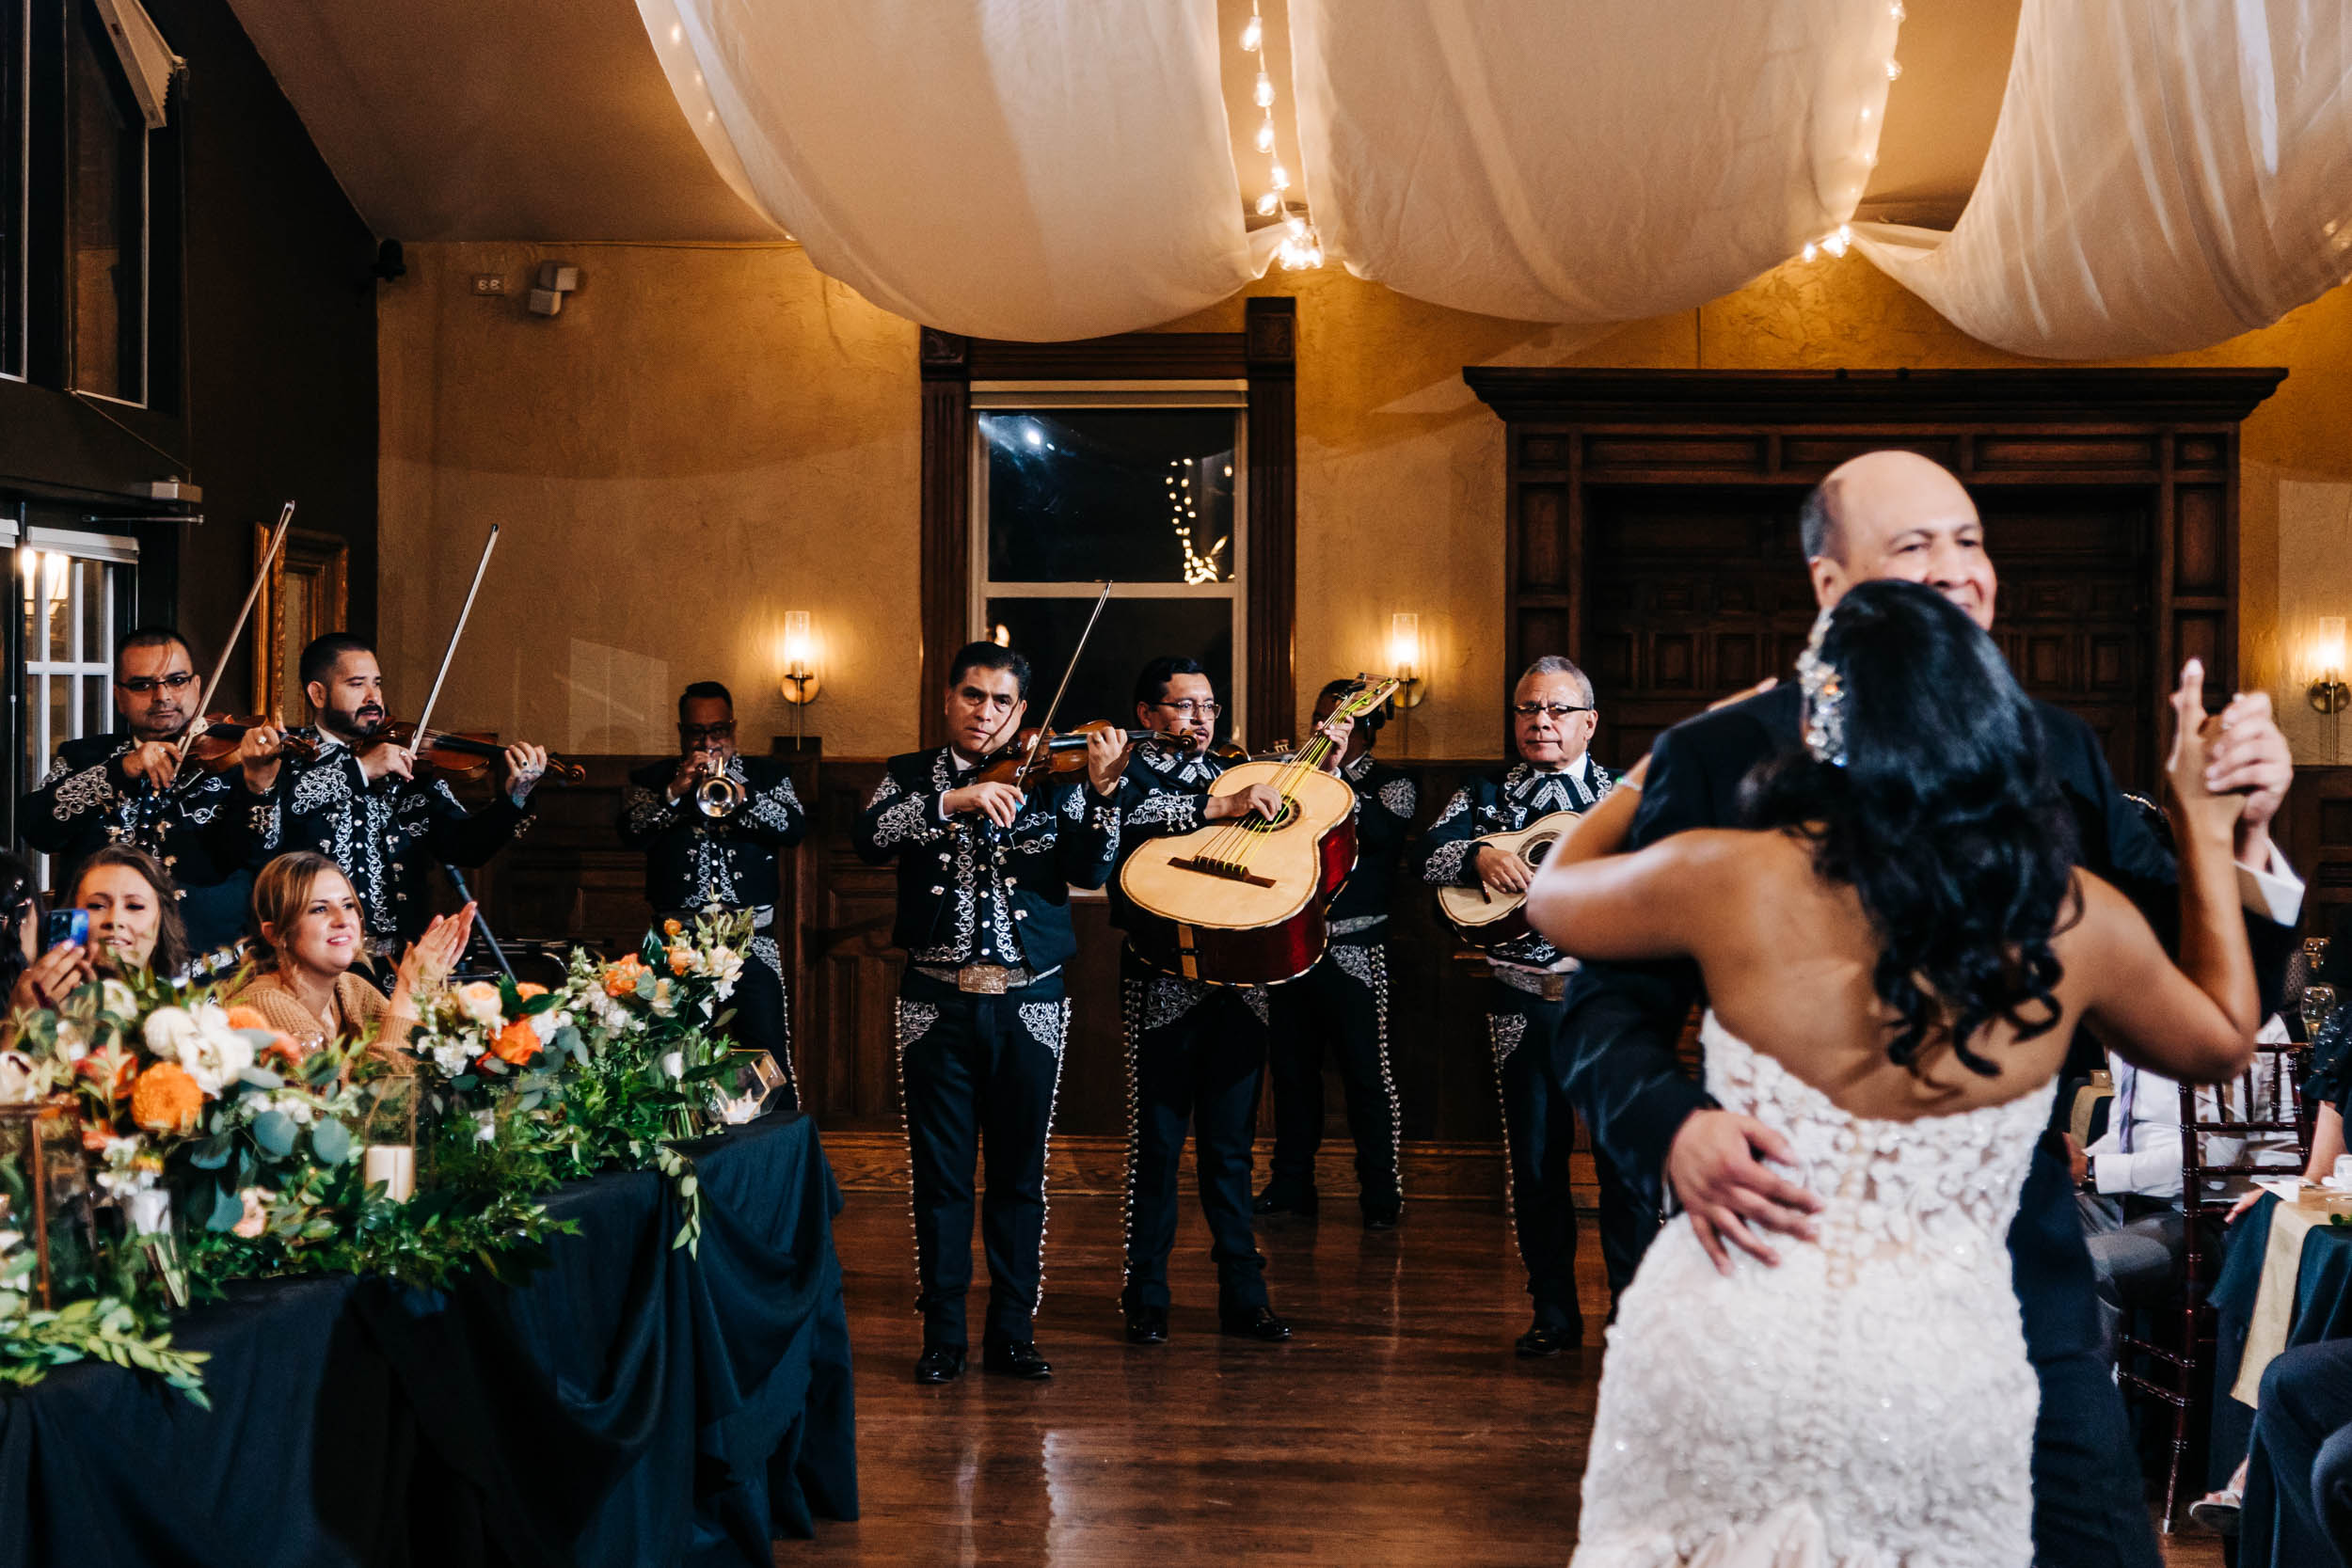 mariachi band playing for father daughter dance at wedding reception